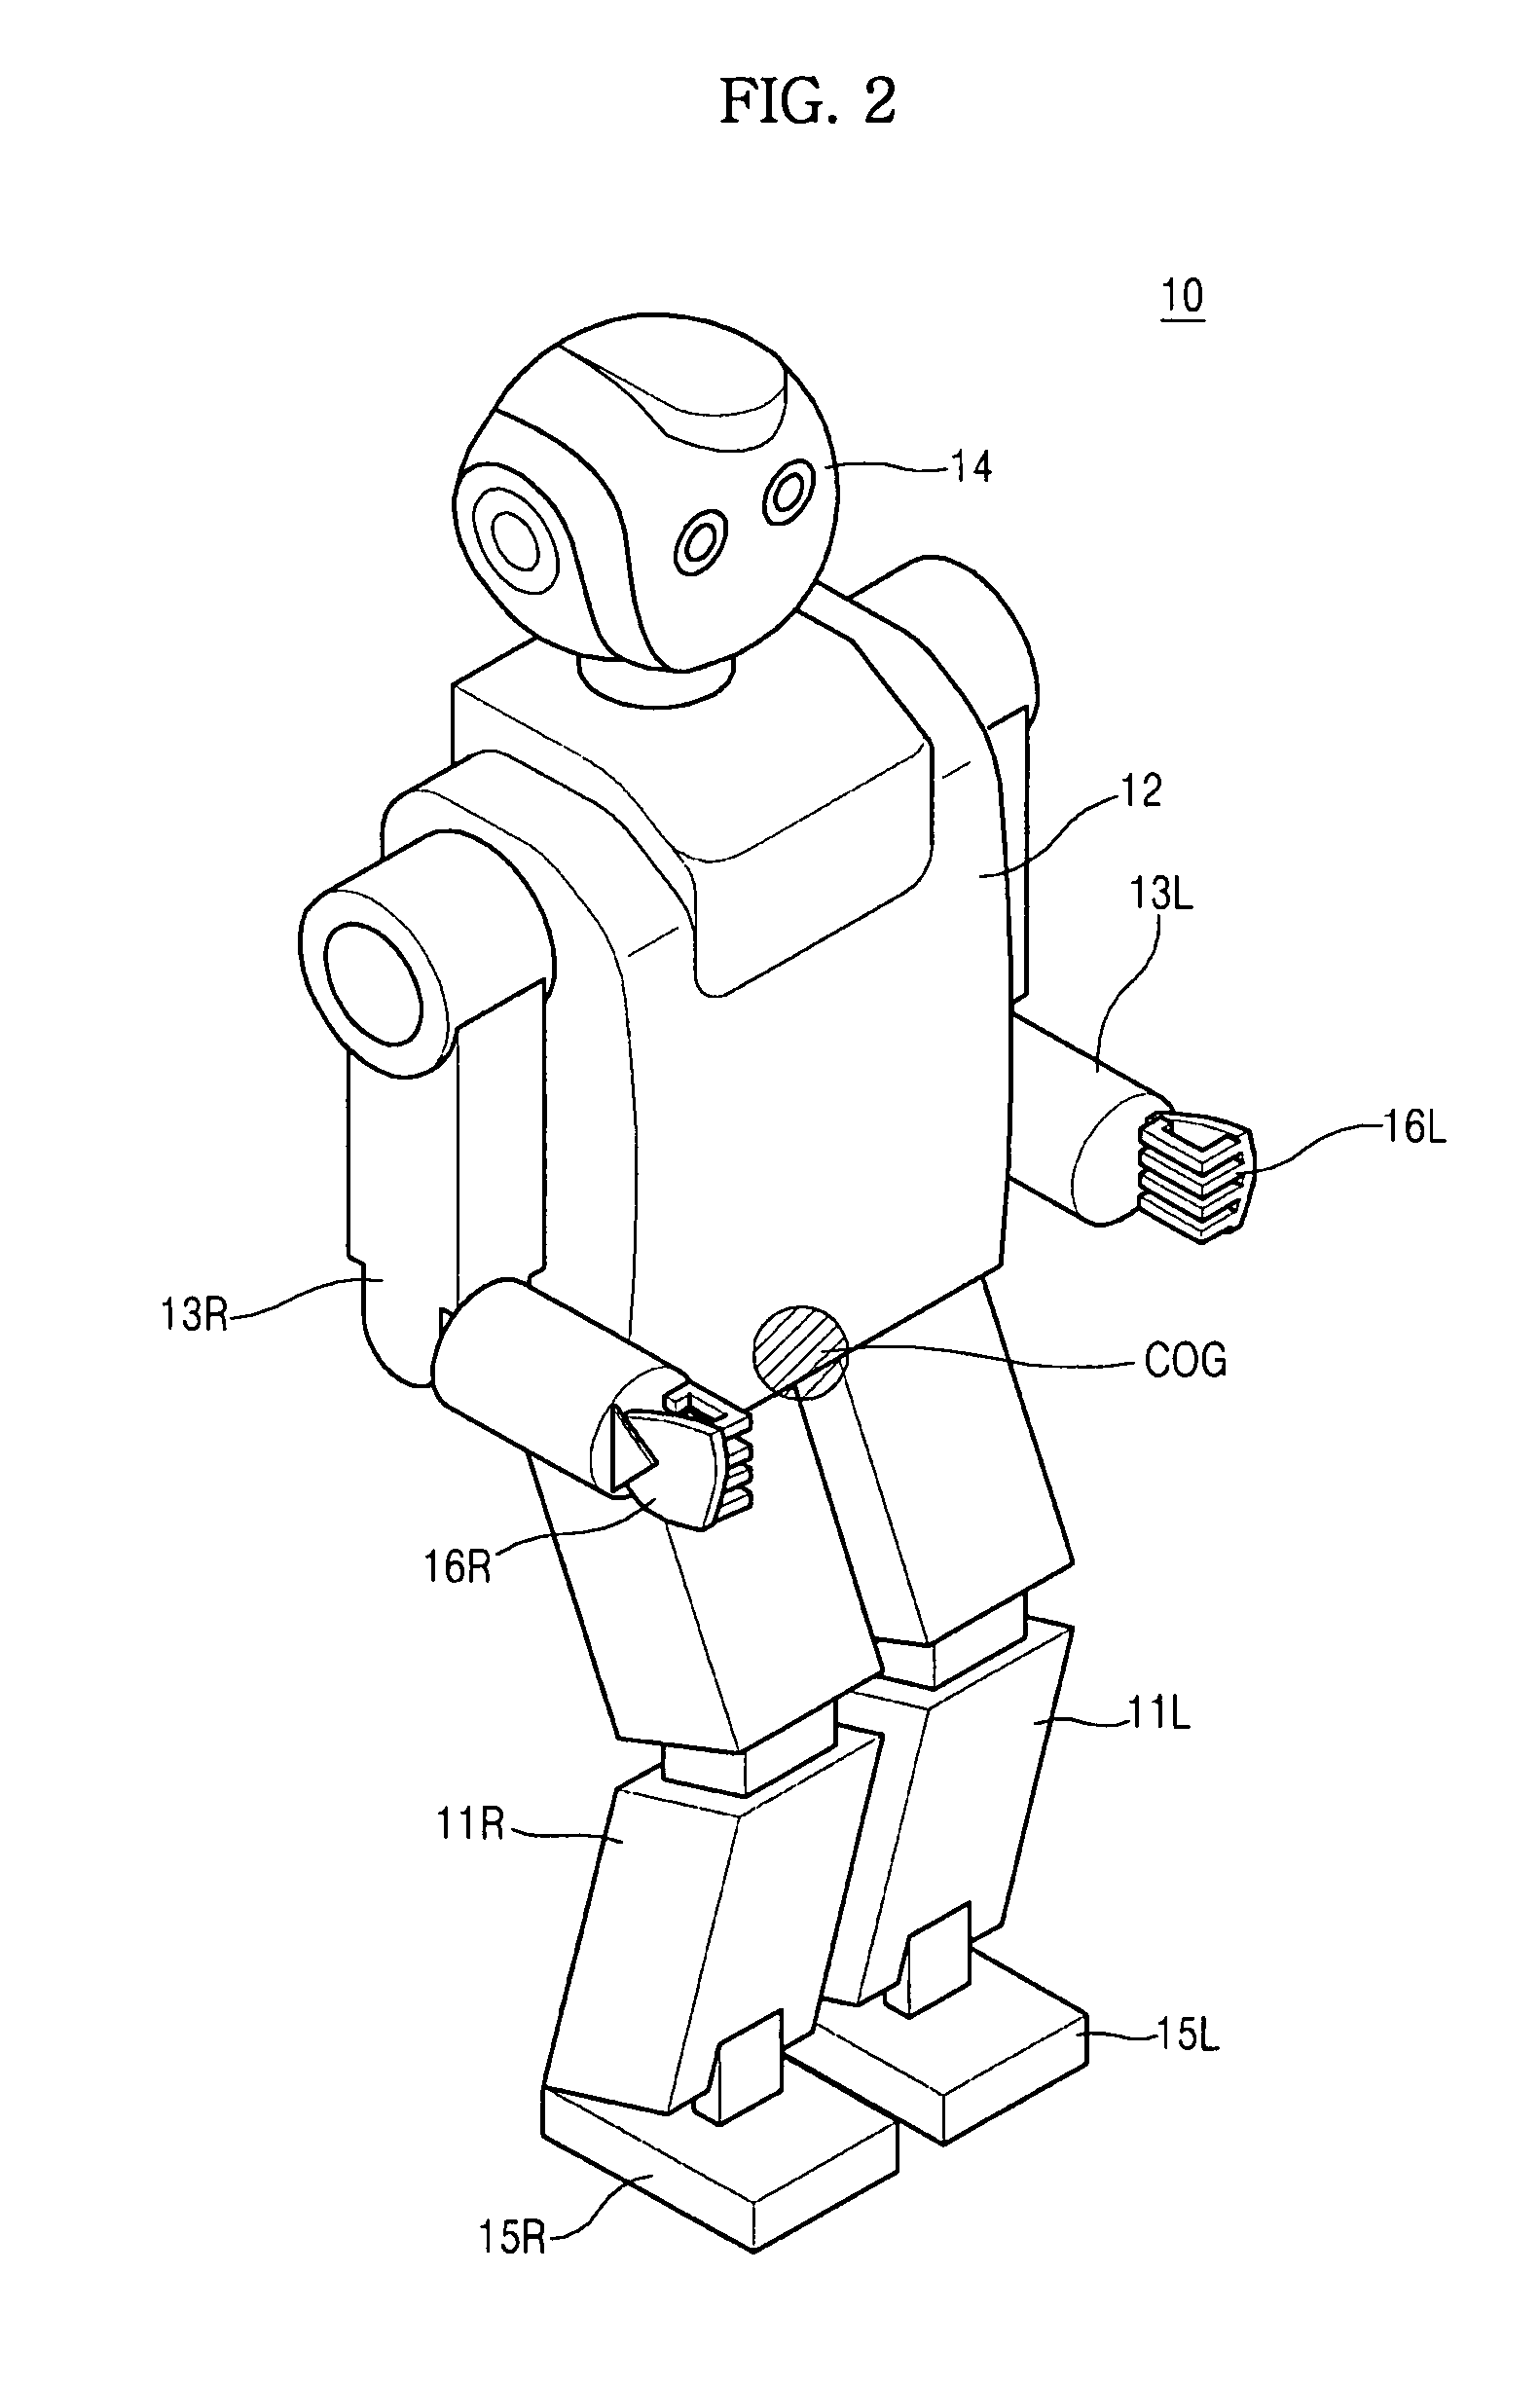 Robot and method of controlling the same